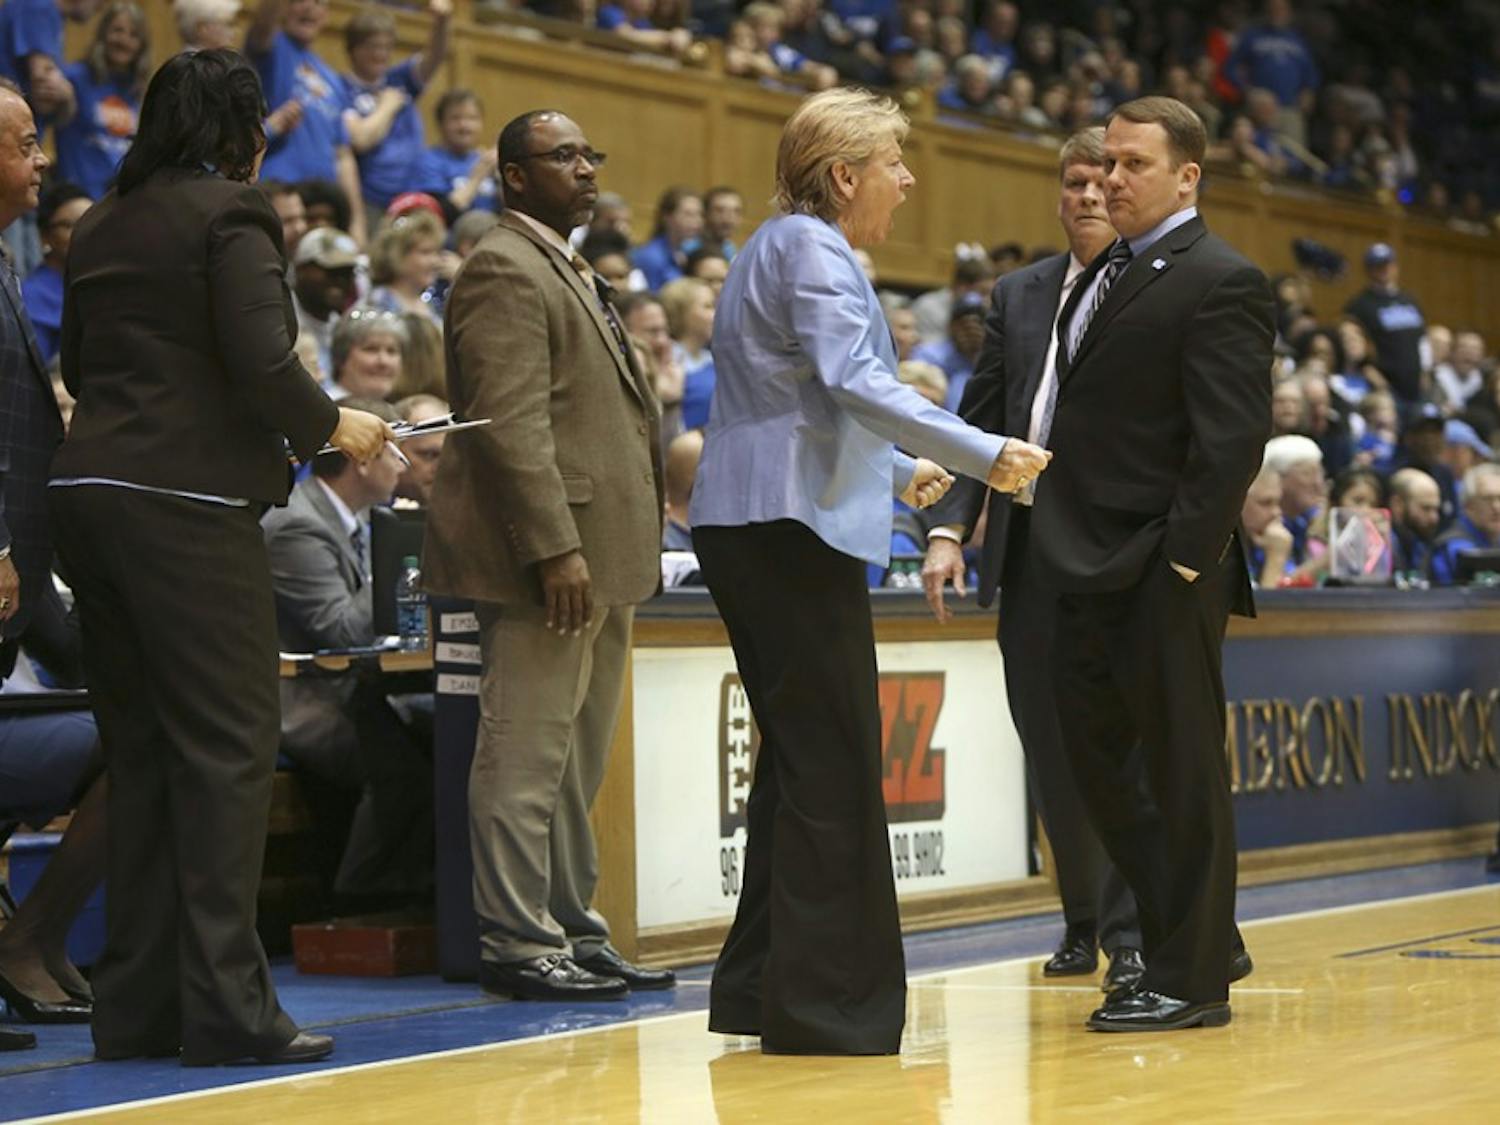 The UNC women's basketball team loss to Duke Sunday afternoon 55 to 71 at Cameron Indoor Stadium.